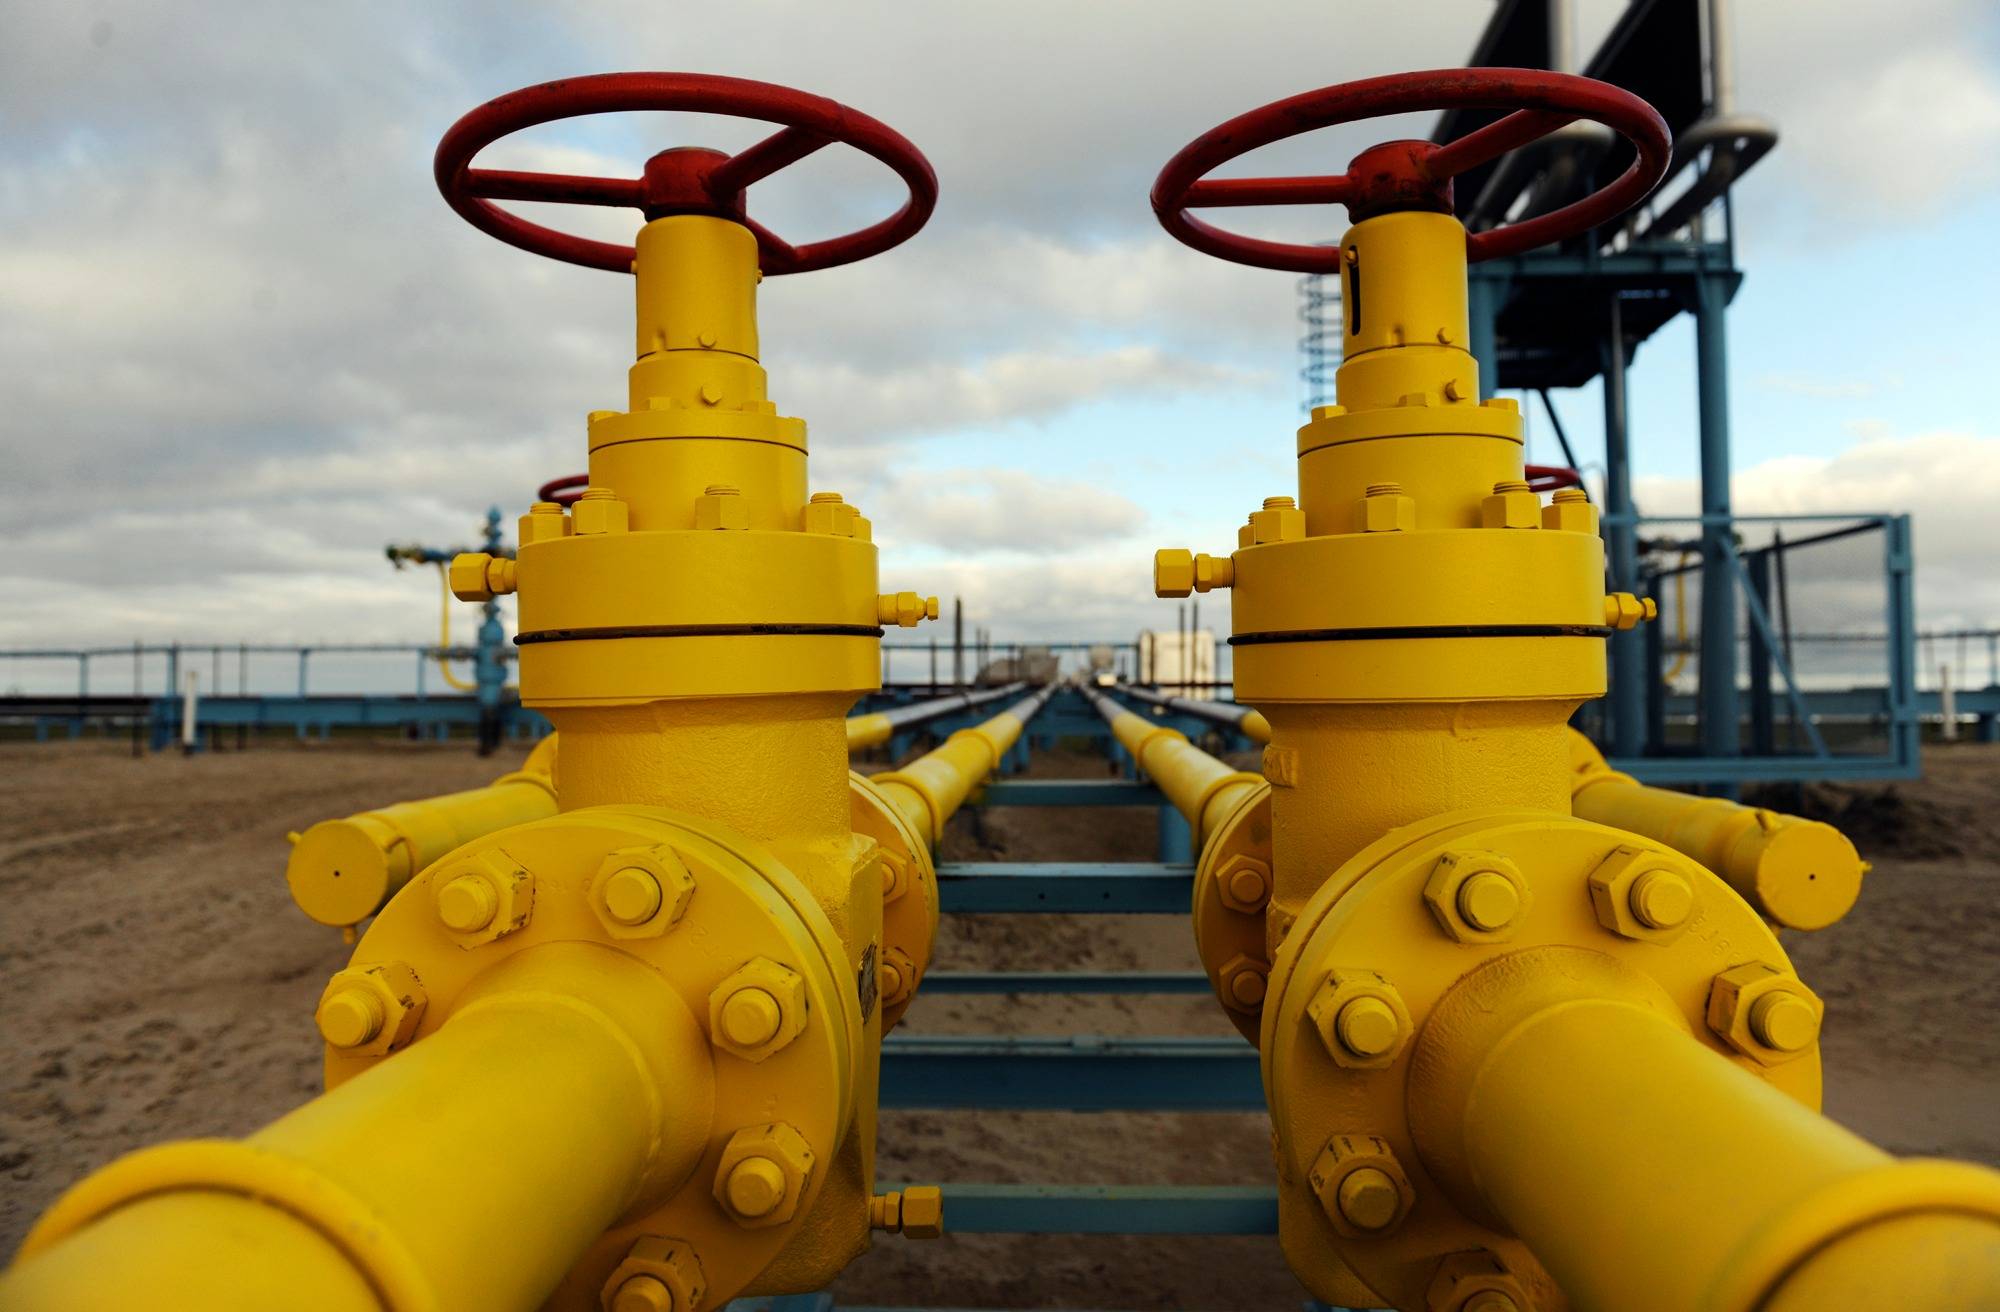 Pipe Suppliers to Benefit From Gas Transport Expansion | Financial ...